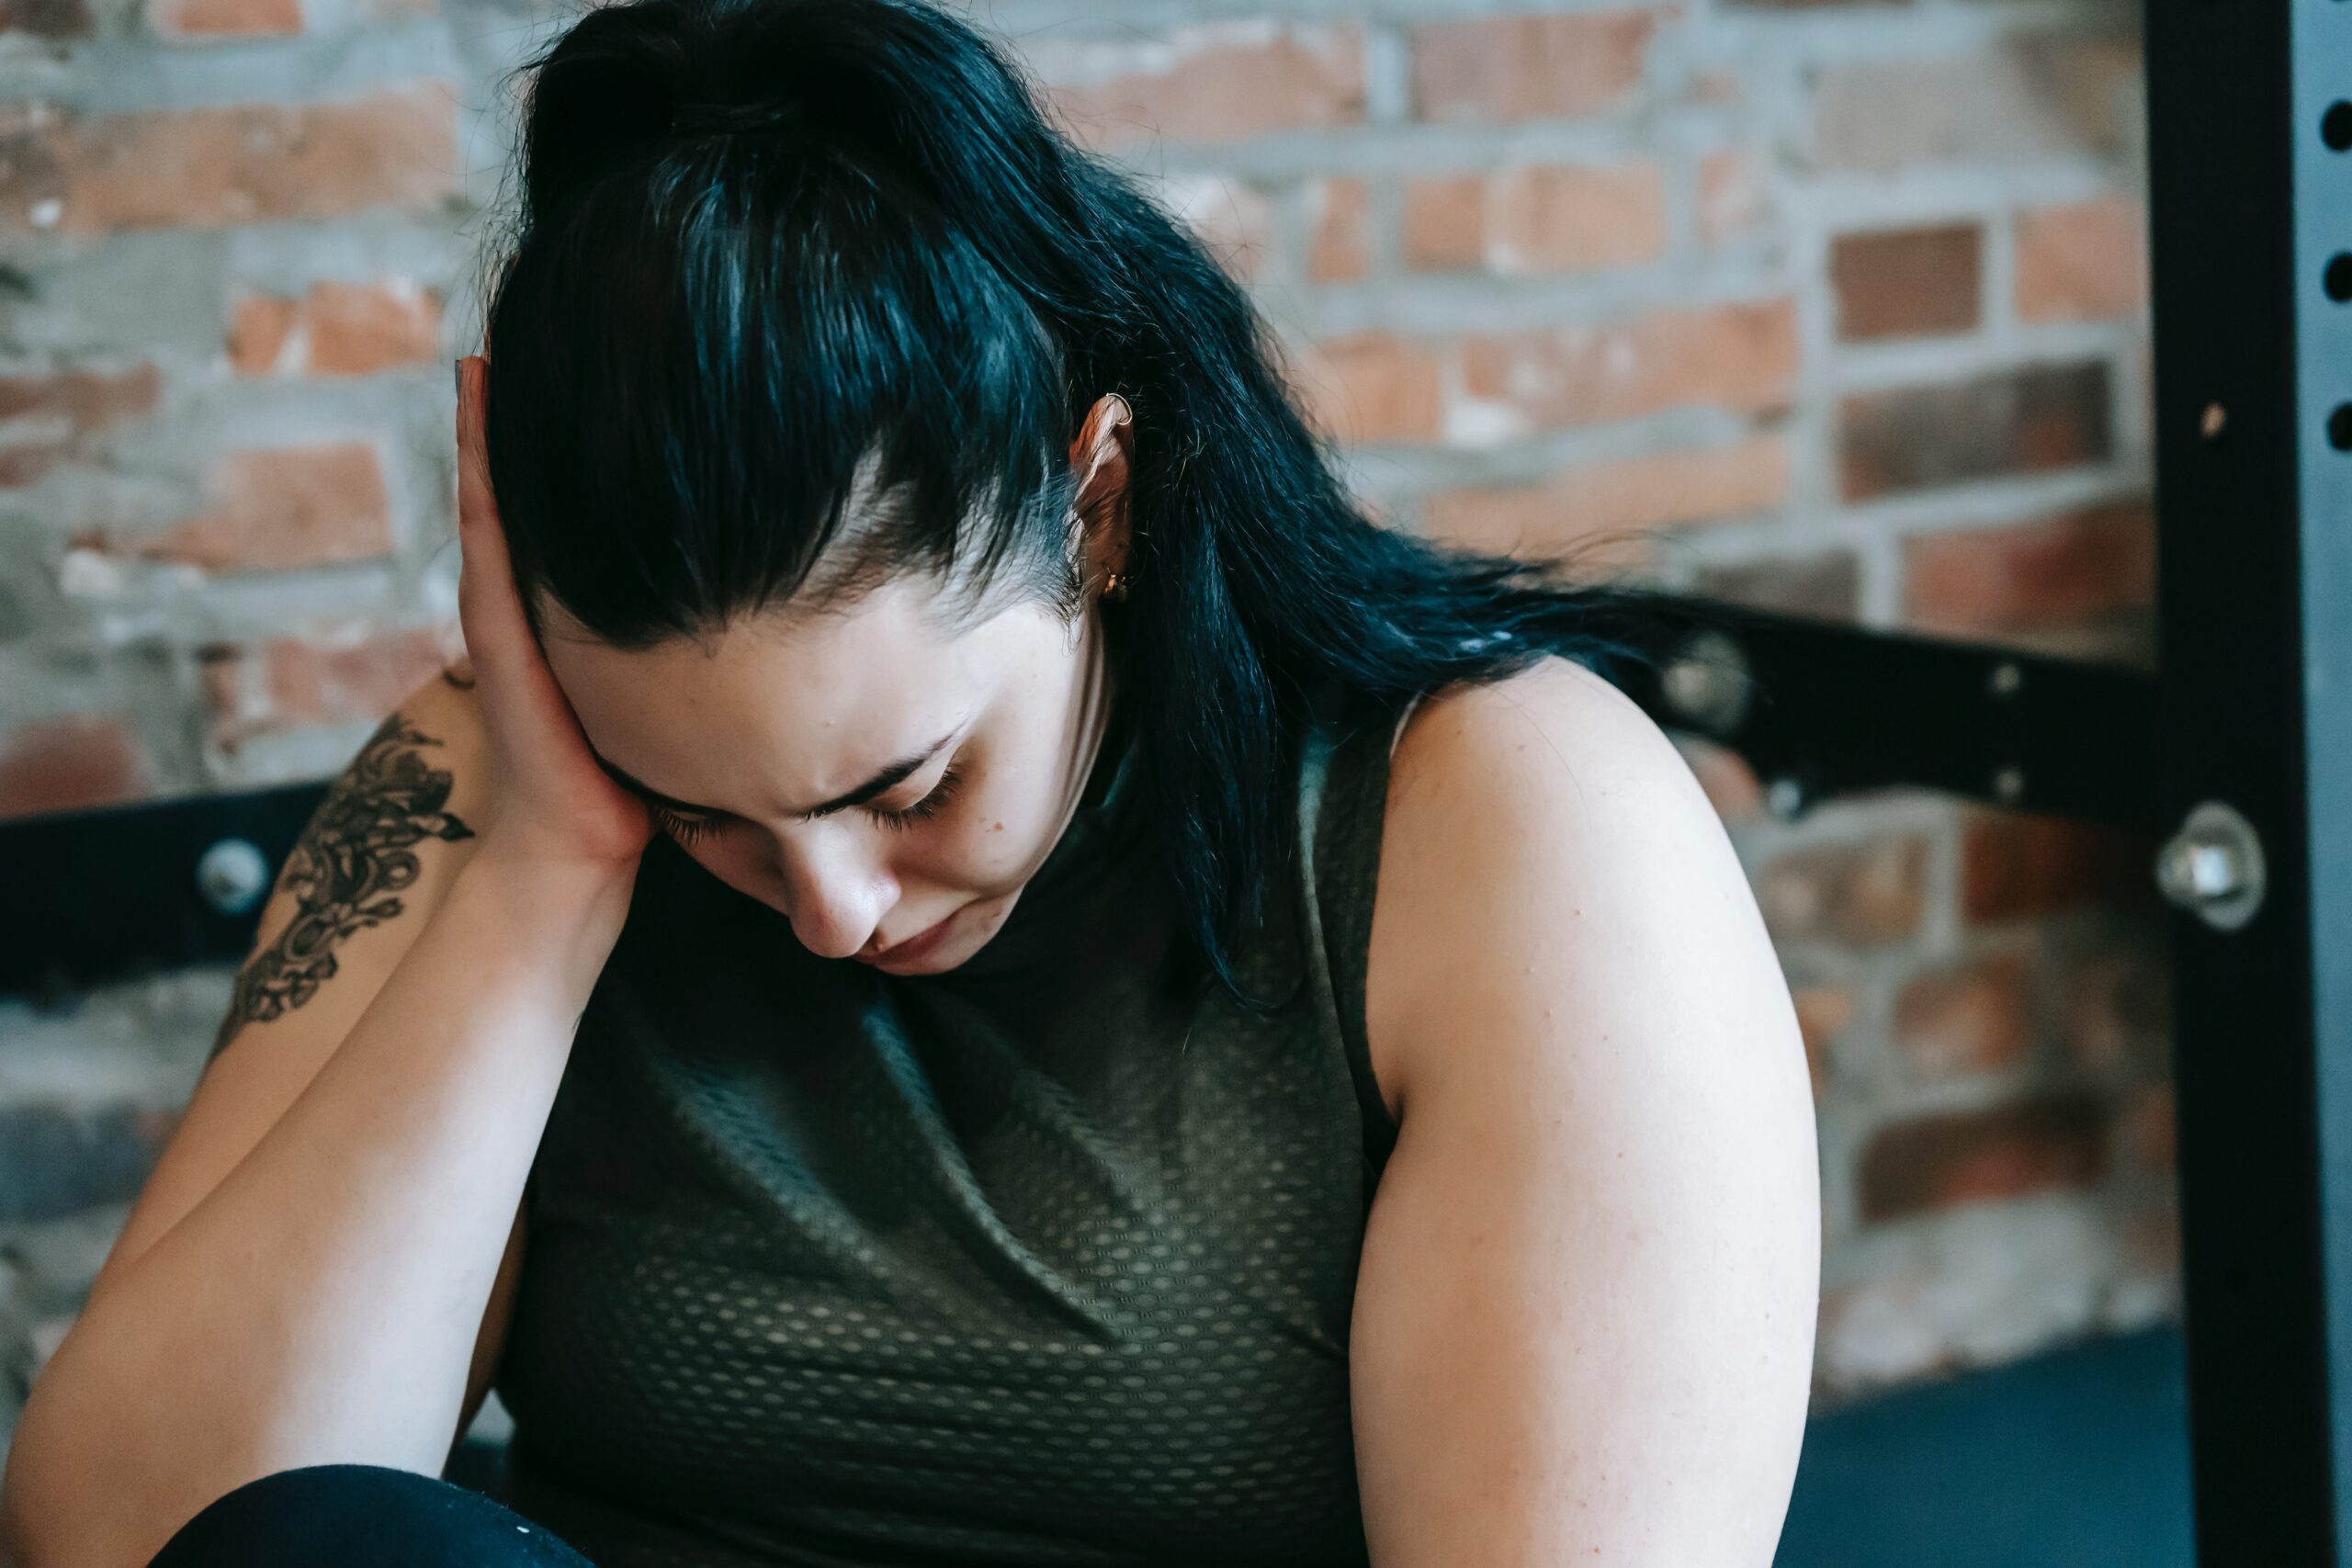 An upset younger woman facing down | Source: Pexels